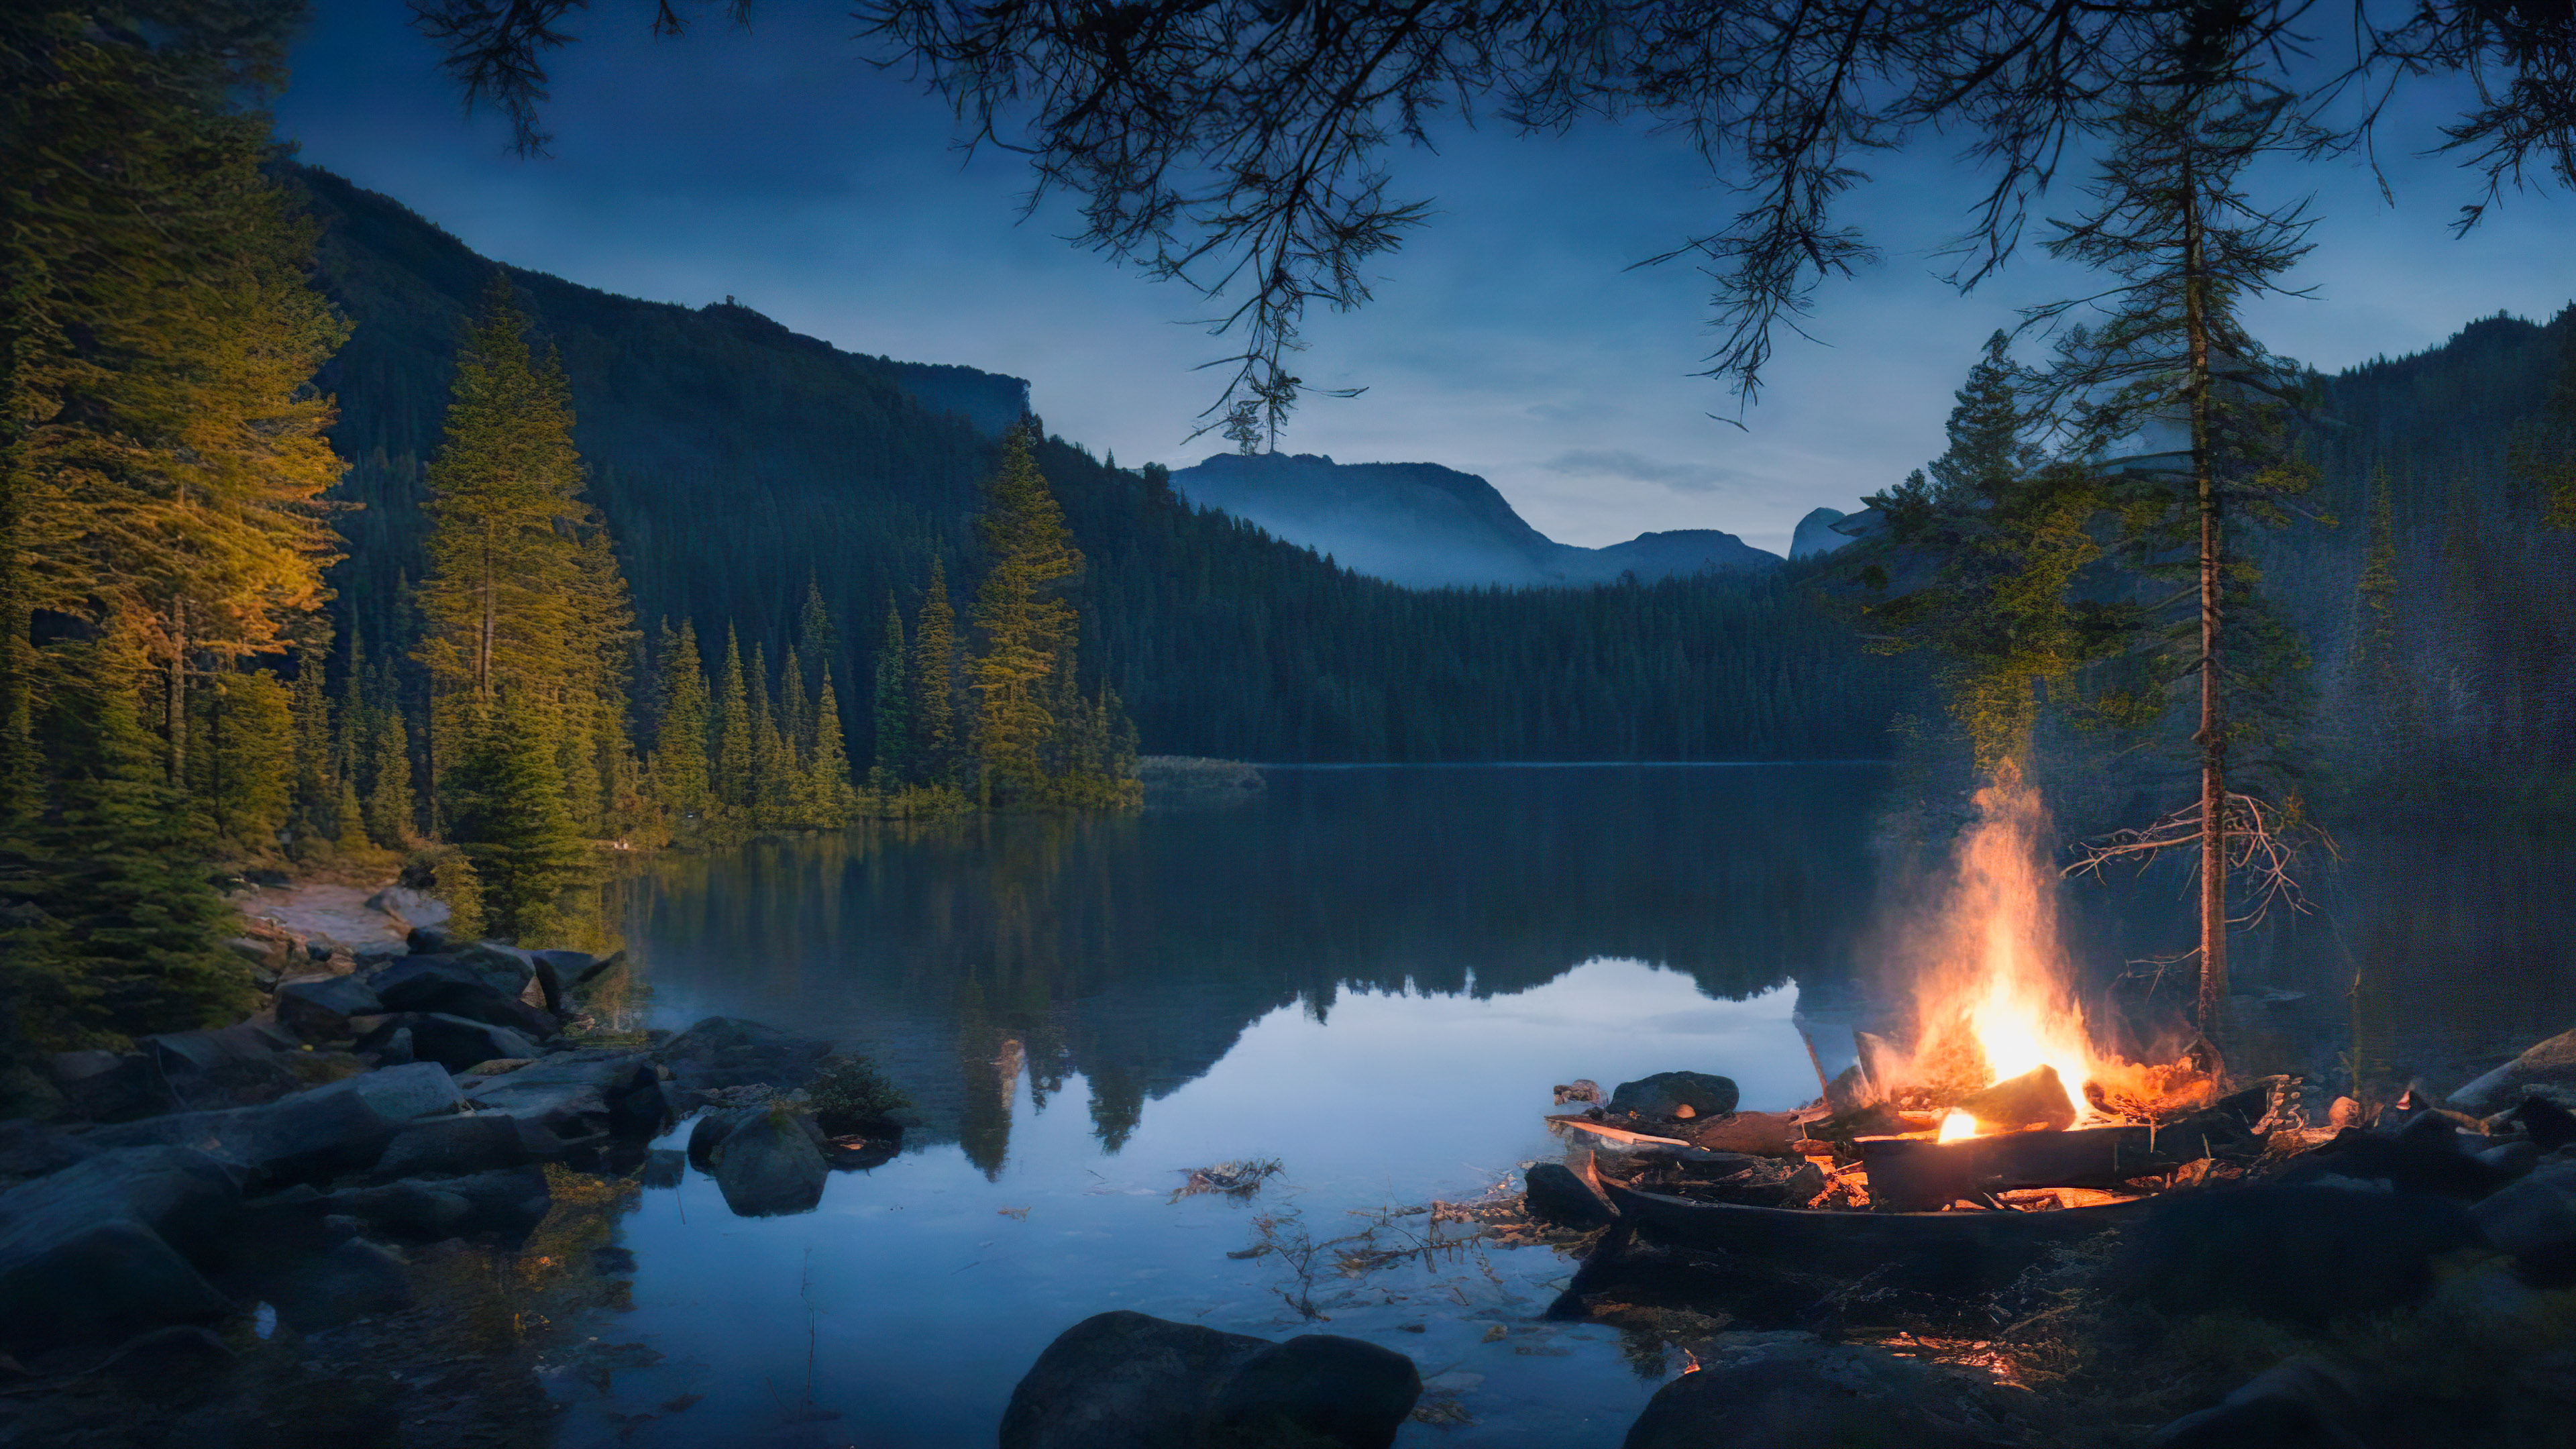 Transform your PC with our desktop nature wallpaper in HD, showcasing a serene lakeside campsite and a flickering campfire, surrounded by a dark, wooded wilderness, and feel the tranquility seep into your workspace.